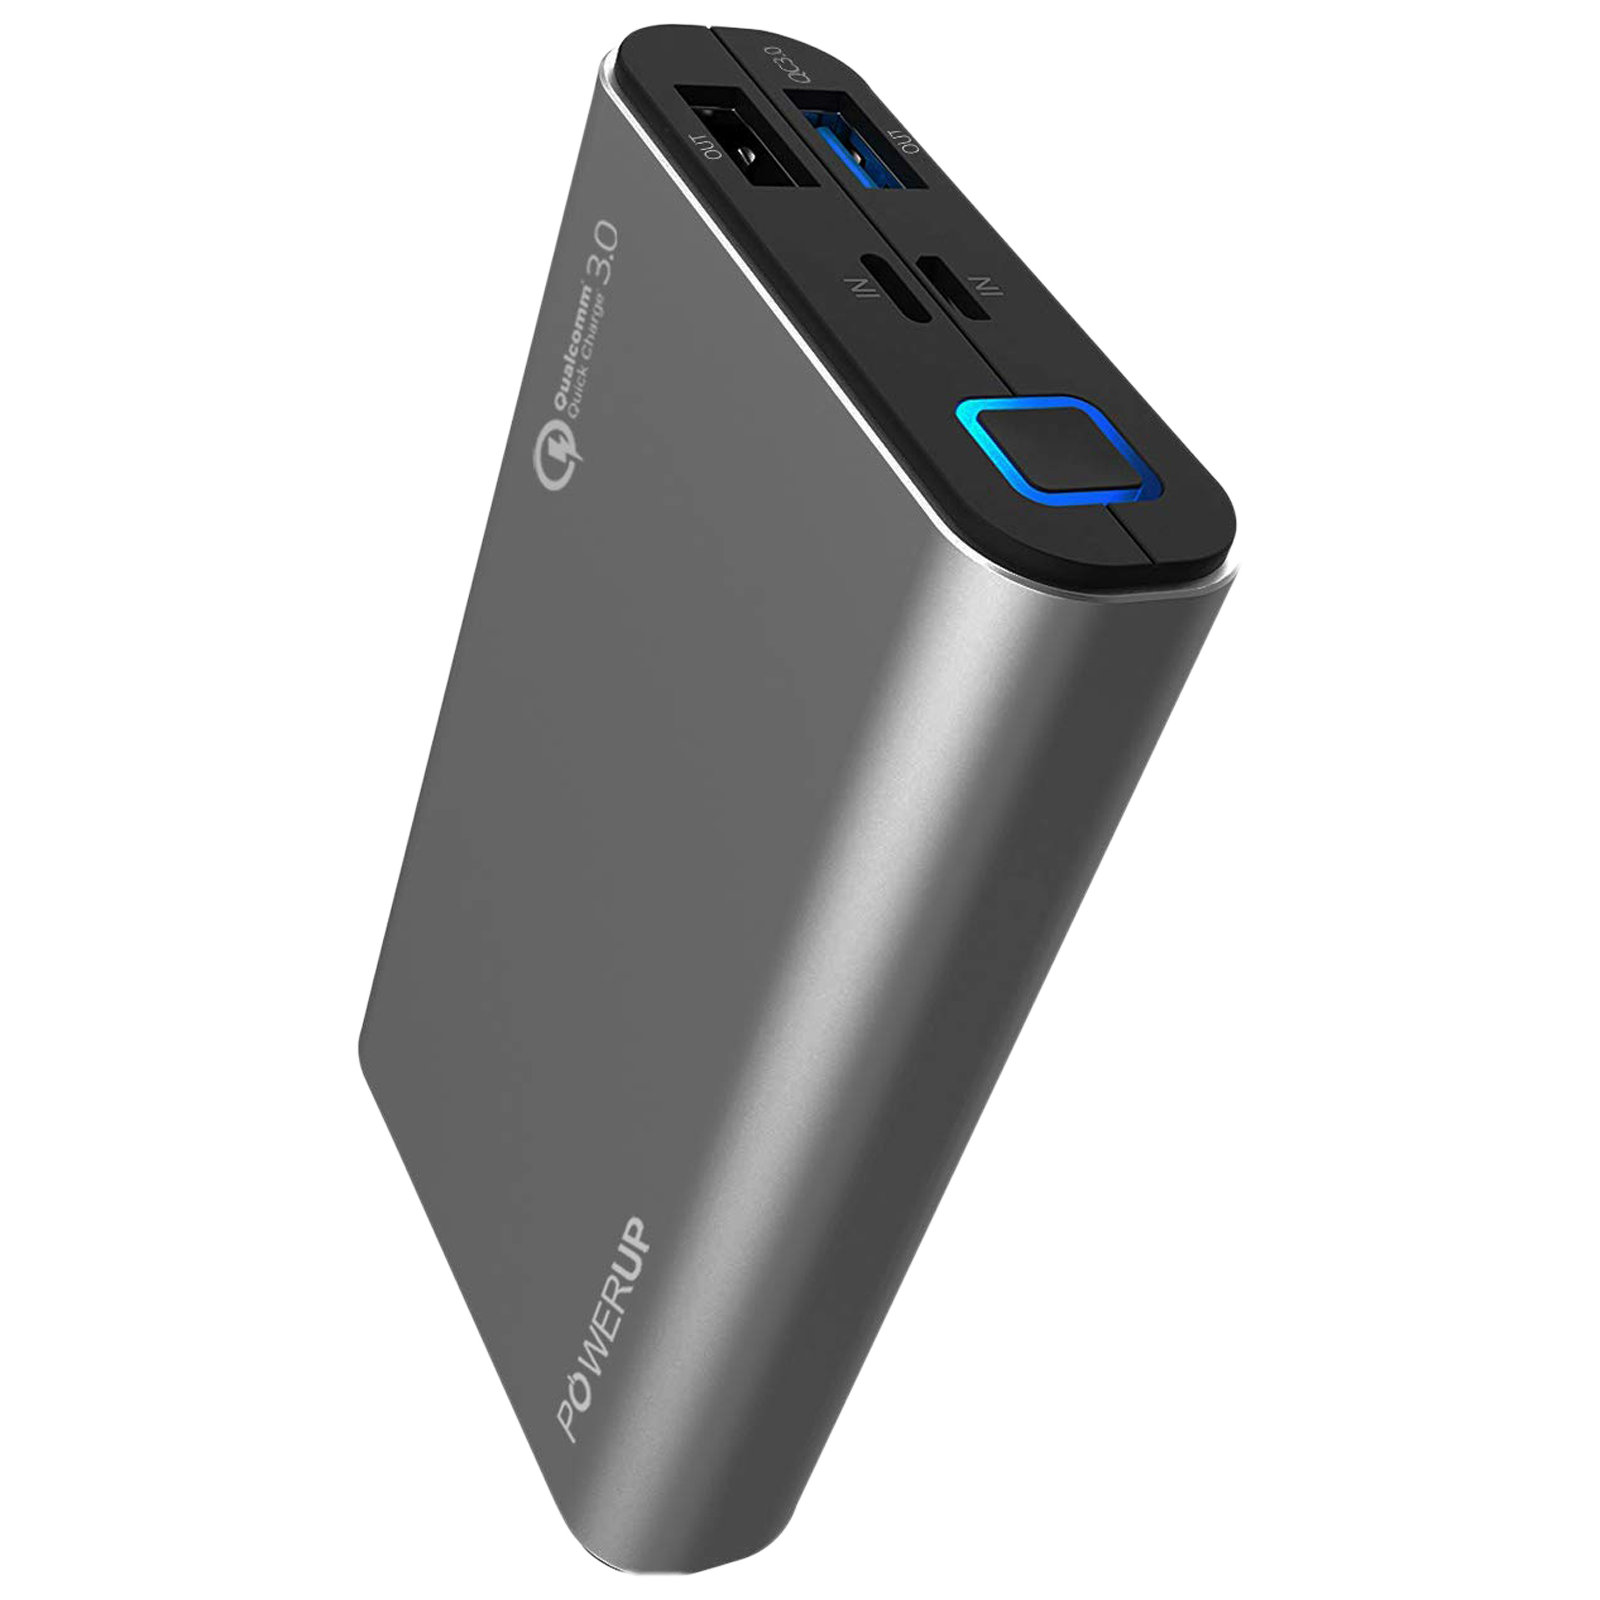 Powerup Stay Charged 10050mAh 2-Port Power Bank (Qualcomm Quick Charge 3.0 Technology, PUP-MPB10K-GMTb, Gun Metal)_1